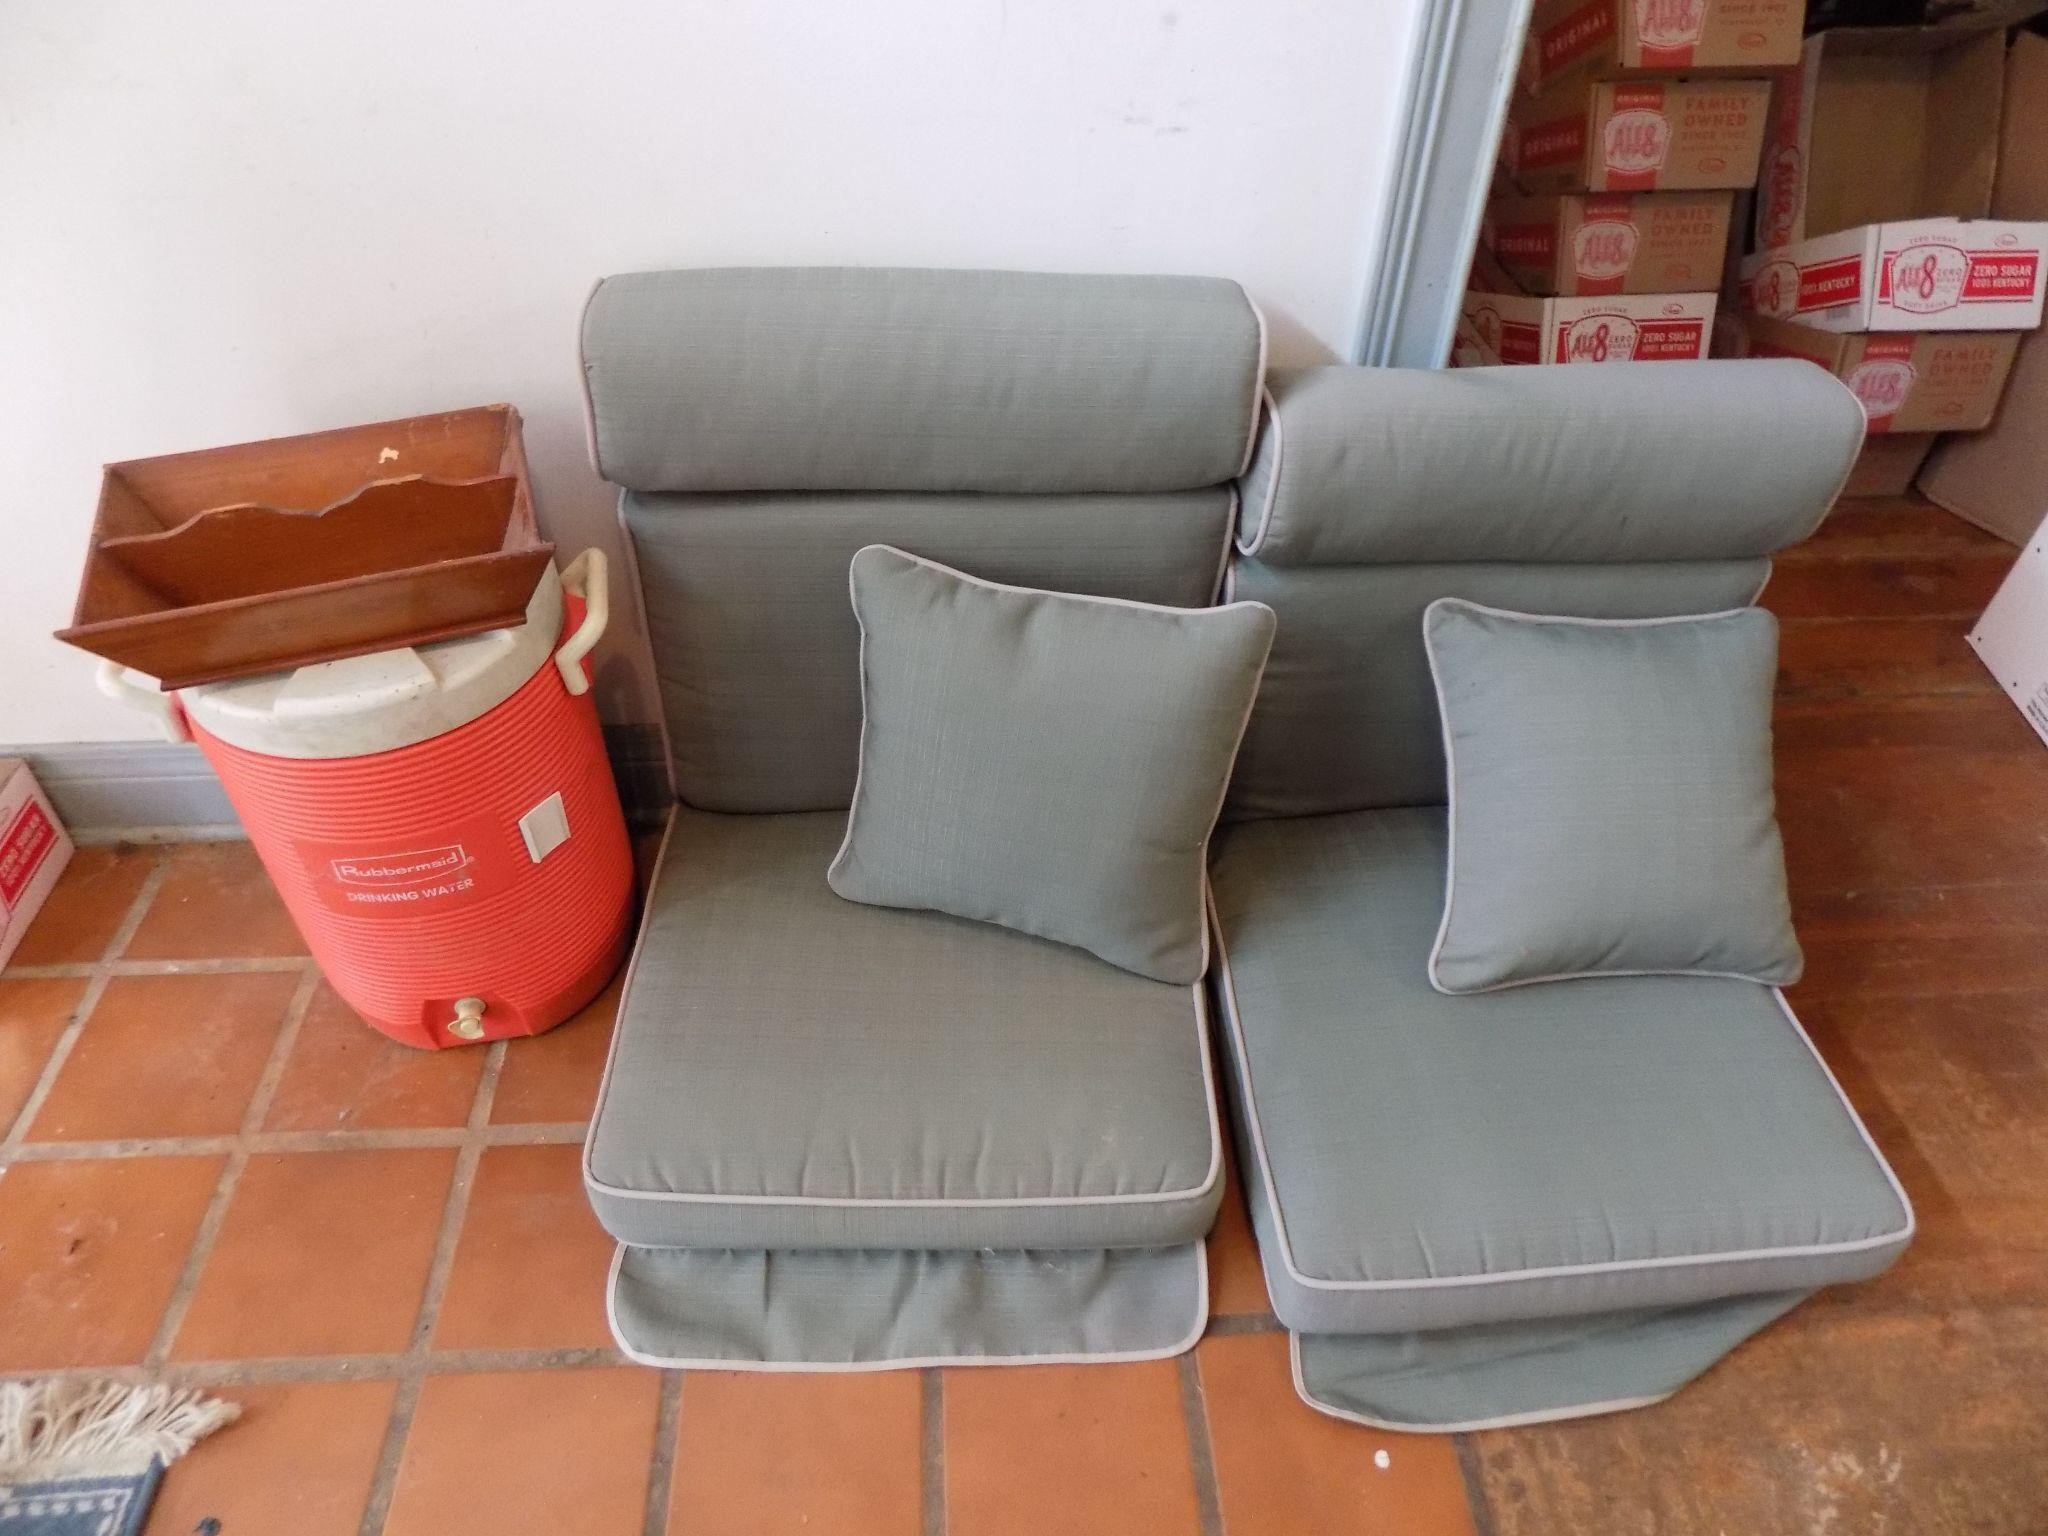 WATER COOLER & LAWN FURNITURE CUSHIONS